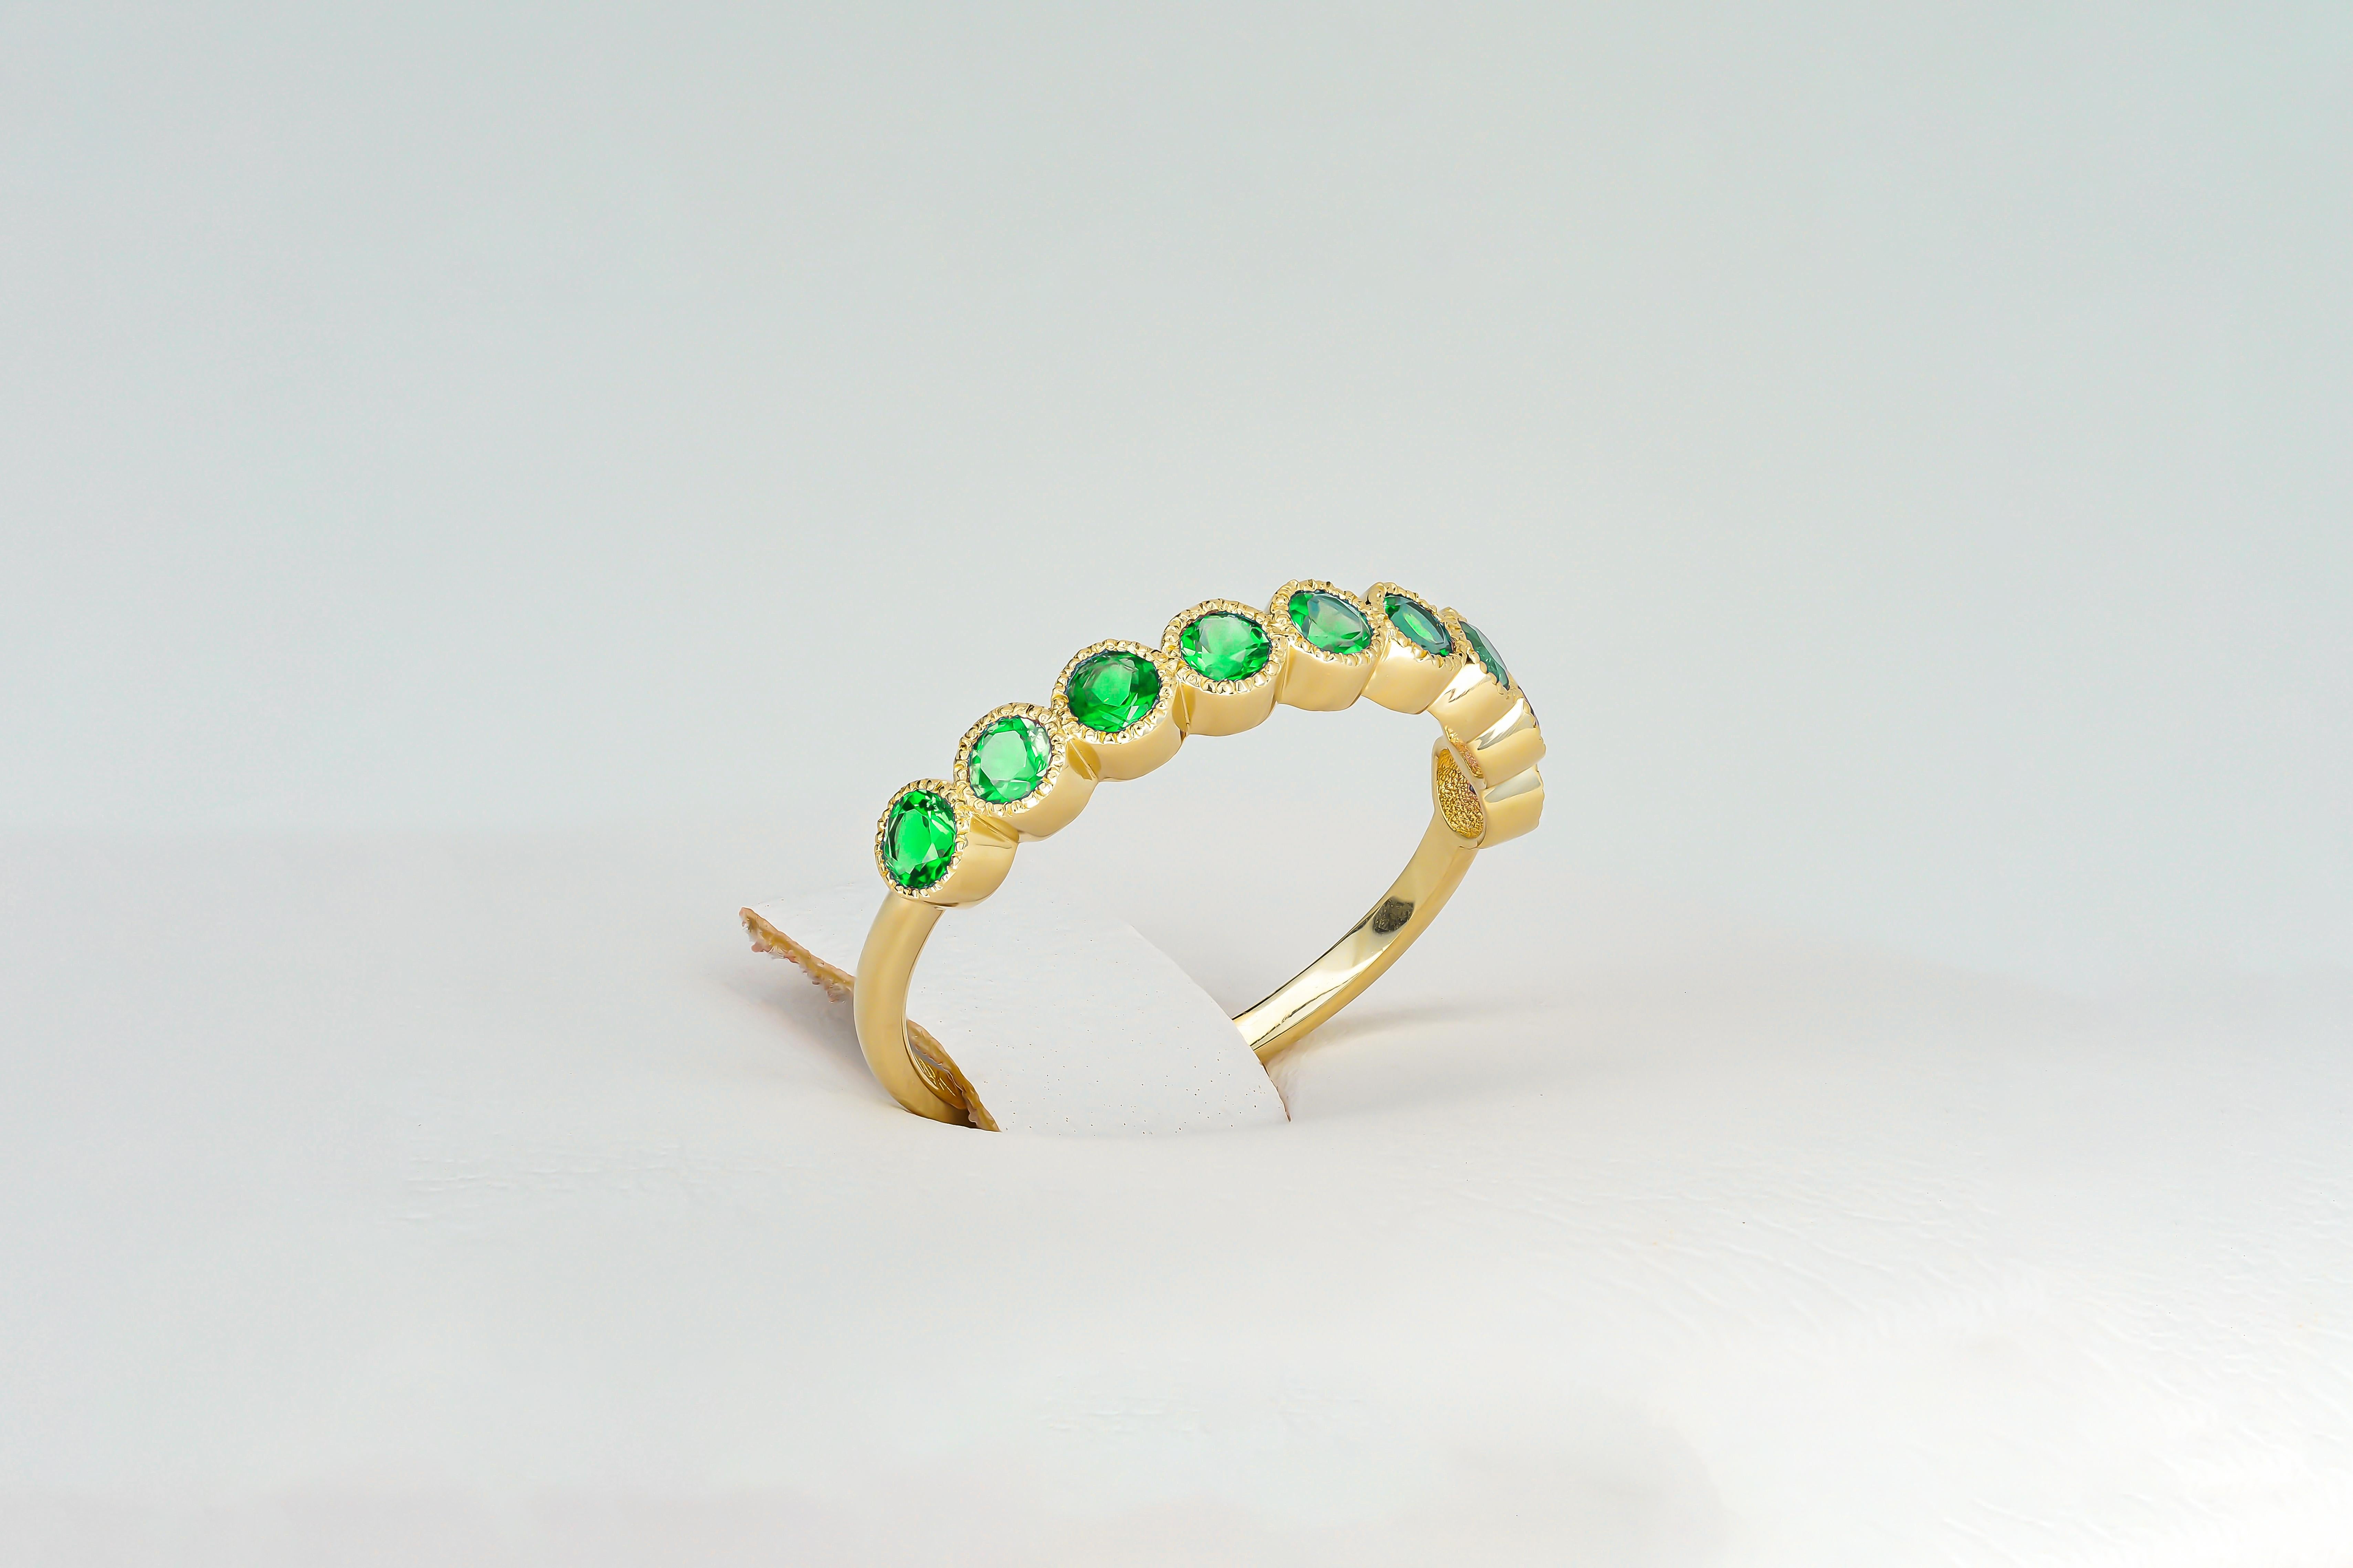 Green gem half eternity 14k gold ring.
Lab emerald semi eternity ring. Round green gemstone gold ring. 2.5 mm lab green emerald ring.

Metal: 14k gold
Weight: 1.8 gr depends from size

Gemstones:
Lab emerald, green color, round cut, 2.5 mm size.